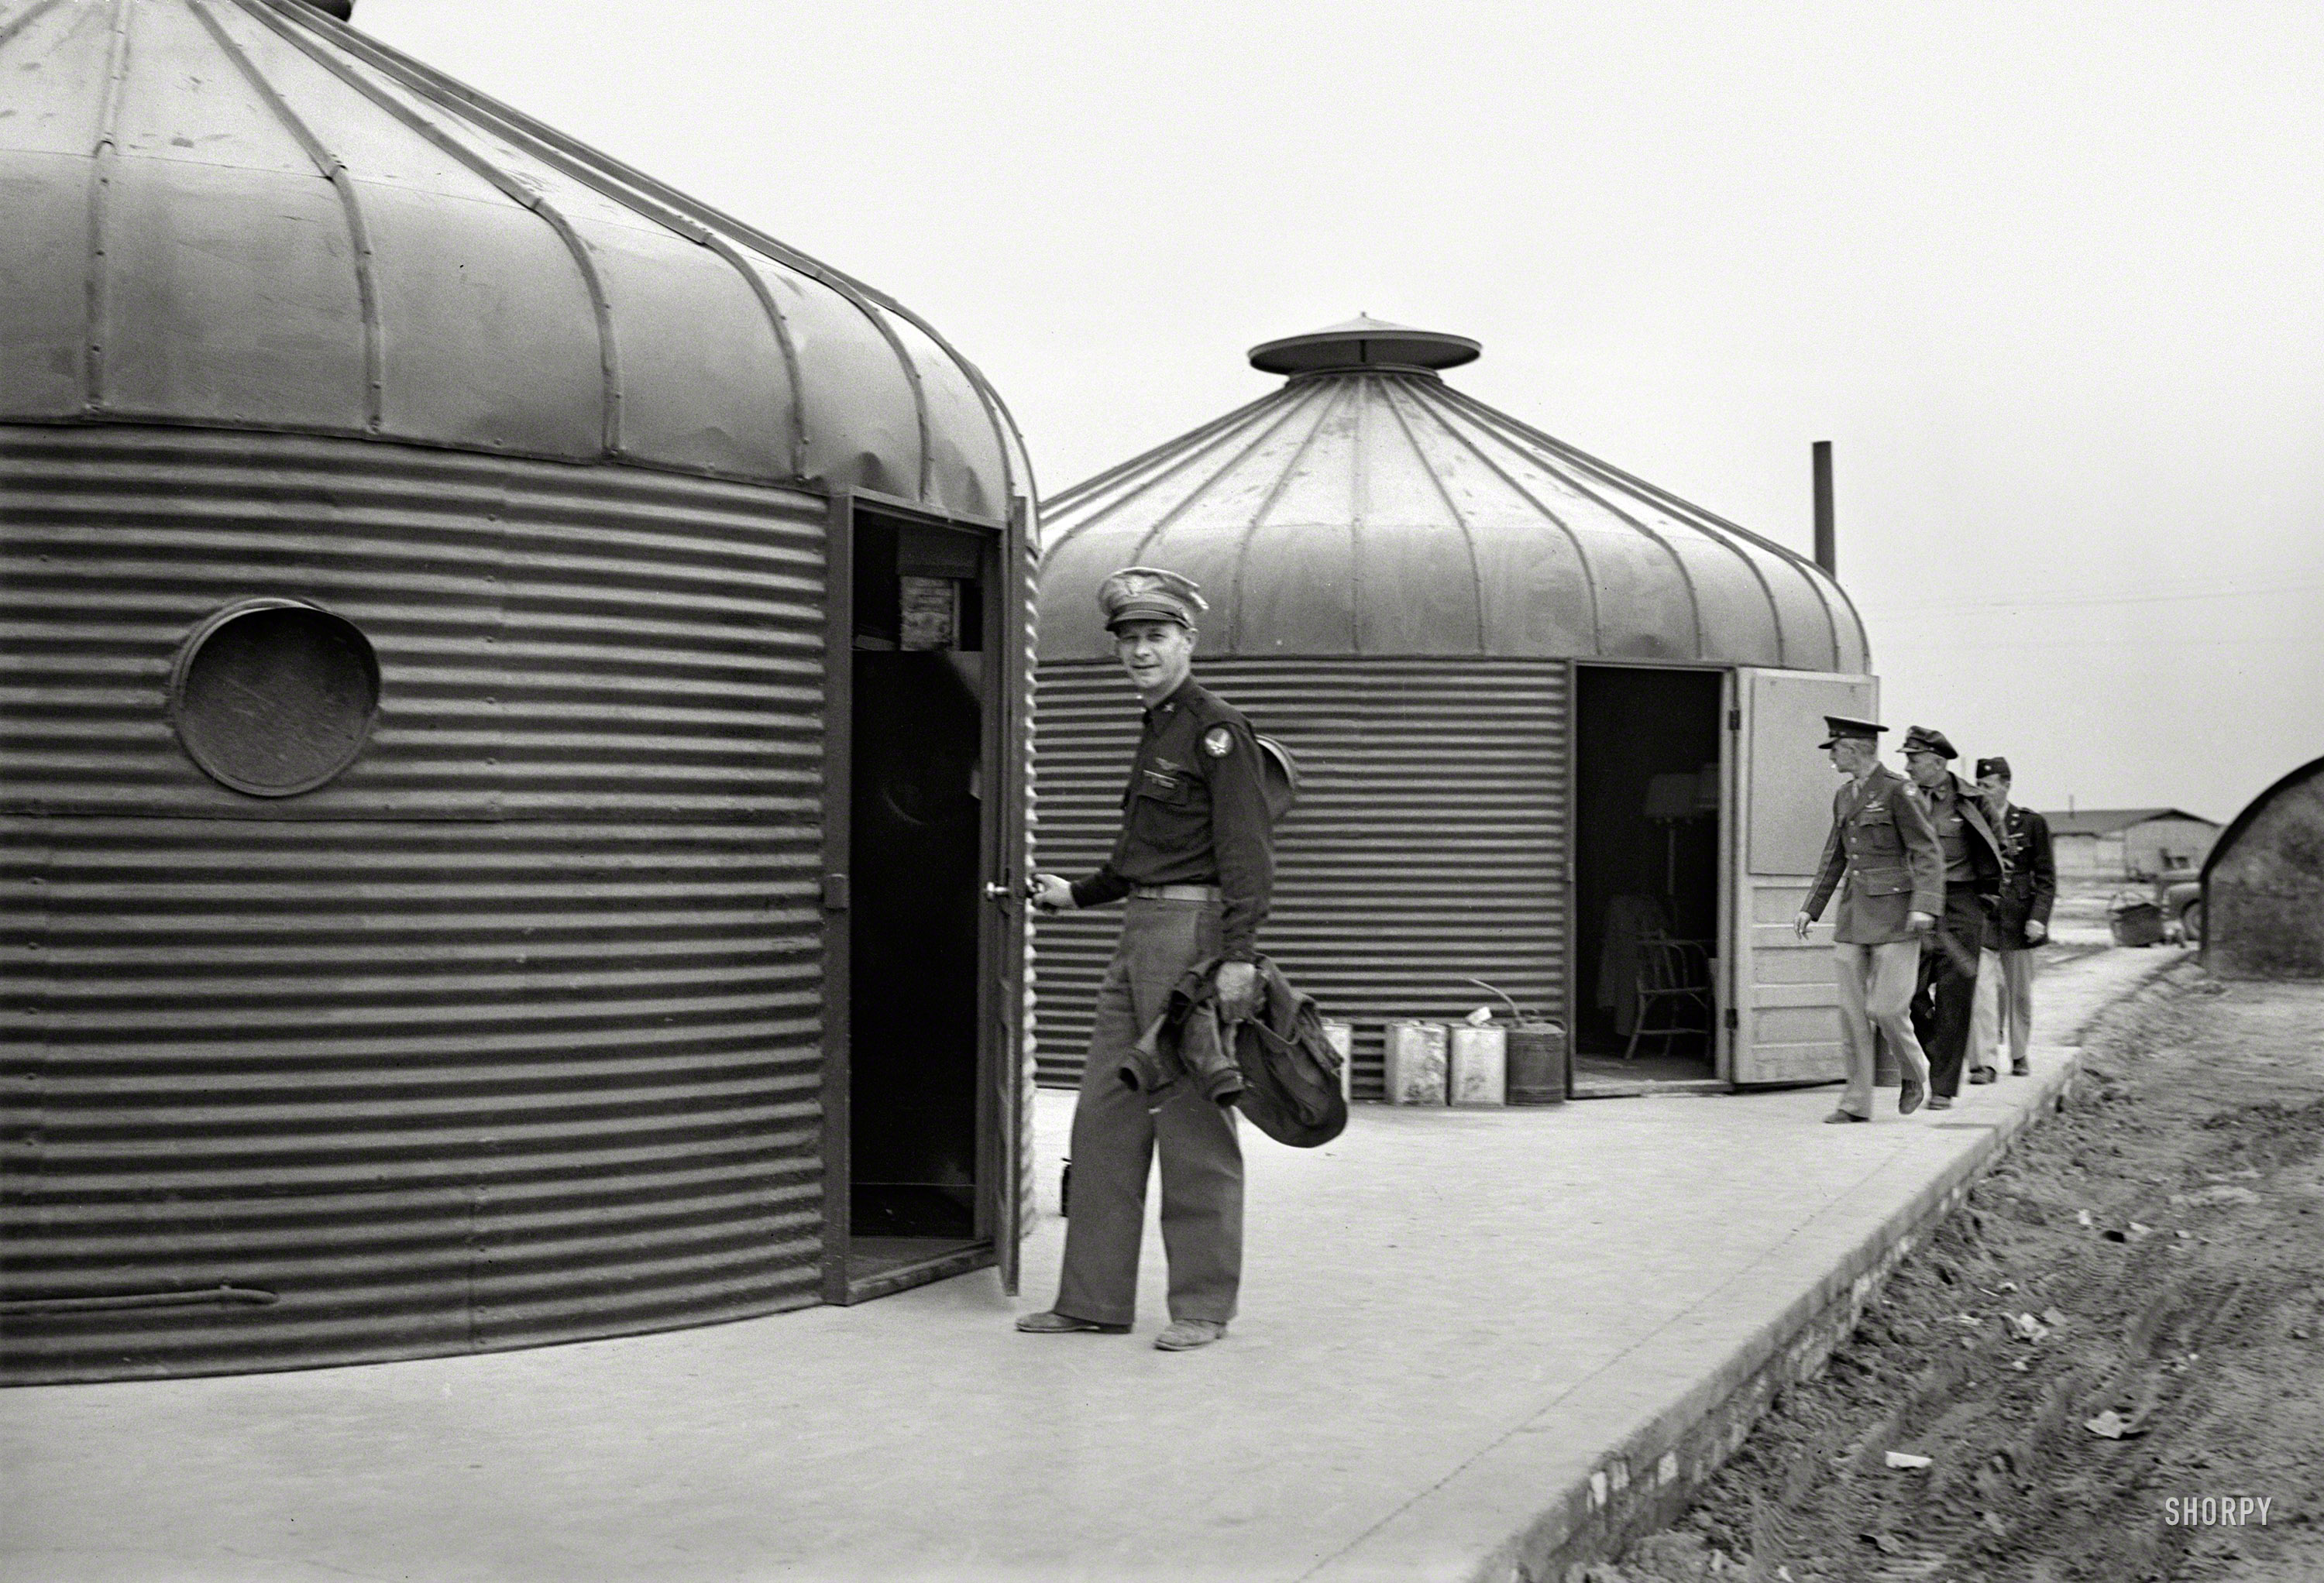 &nbsp; &nbsp; &nbsp; &nbsp; Somewhere in North Africa, with Carl Spaatz leading the group on the right.
Circa 1943, another look at the Dymaxion Deployment Units last seen here. In this view, corrugated steel with a glint of brass. Note the book (?) on the shelf. Office of War Information, photographer unknown. View full size.